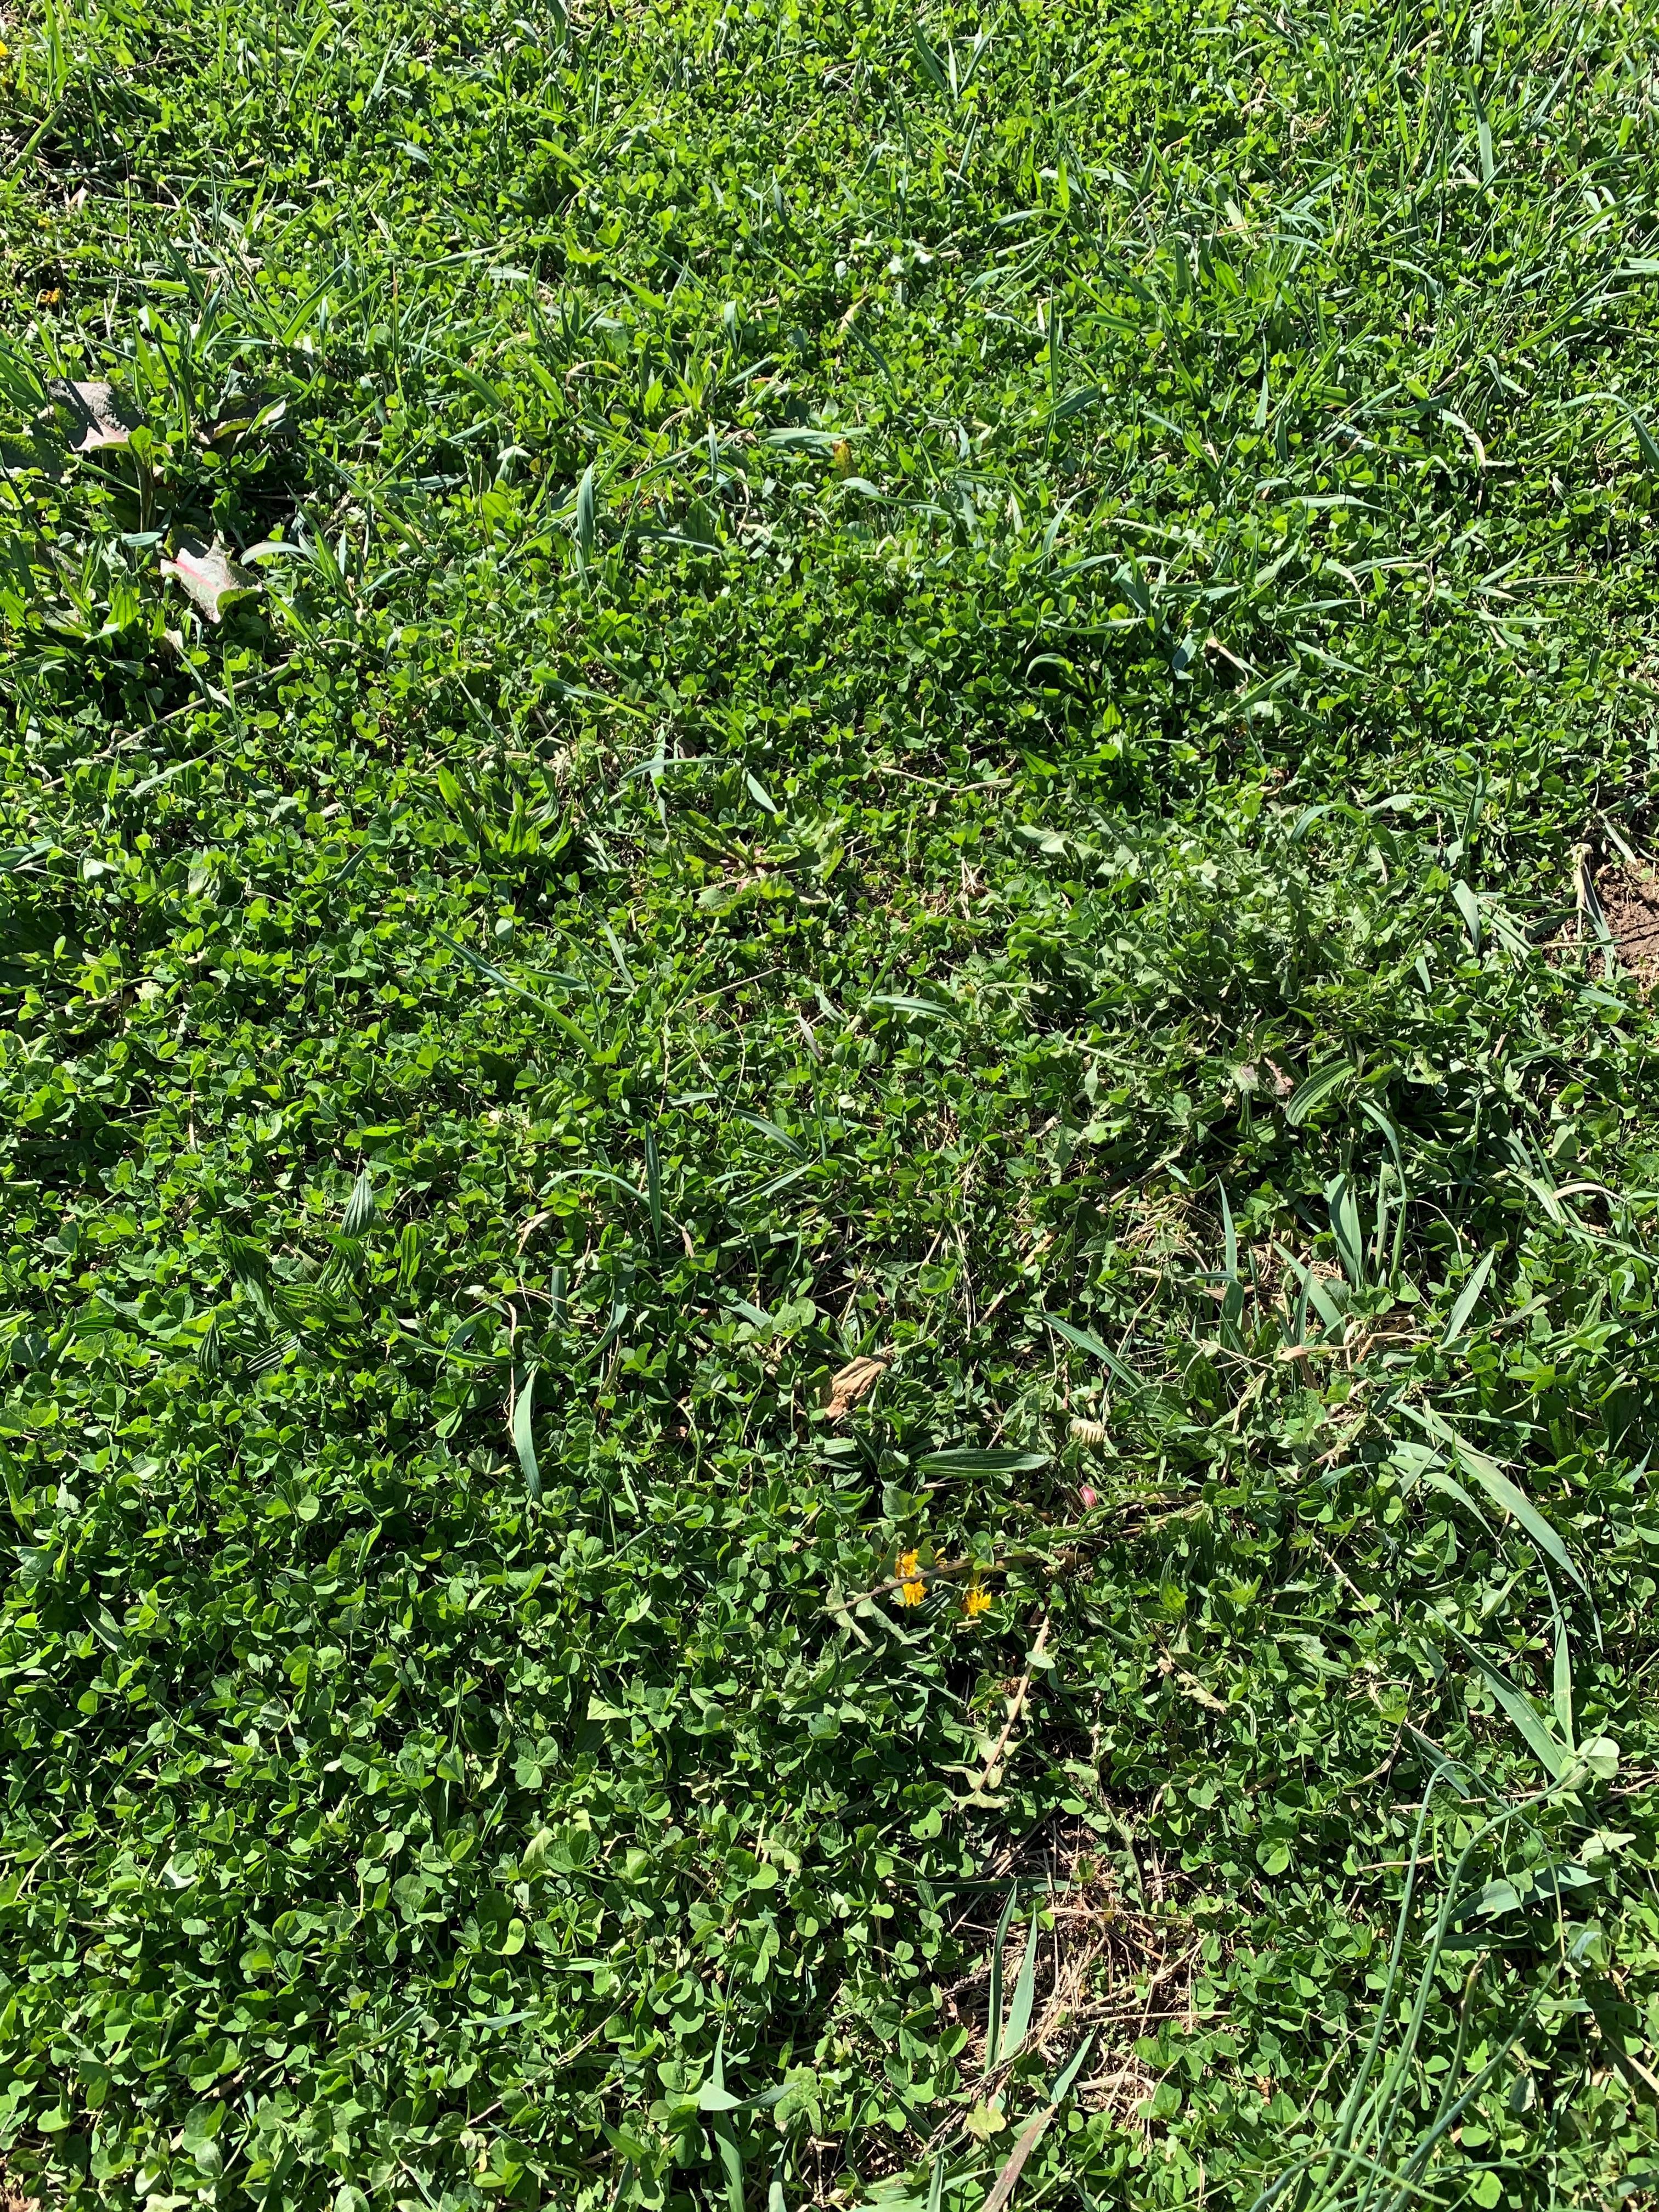 Thick stands of white clover are a clear indication of overgrazing, and likely the location of significant weed establishment in the near future.